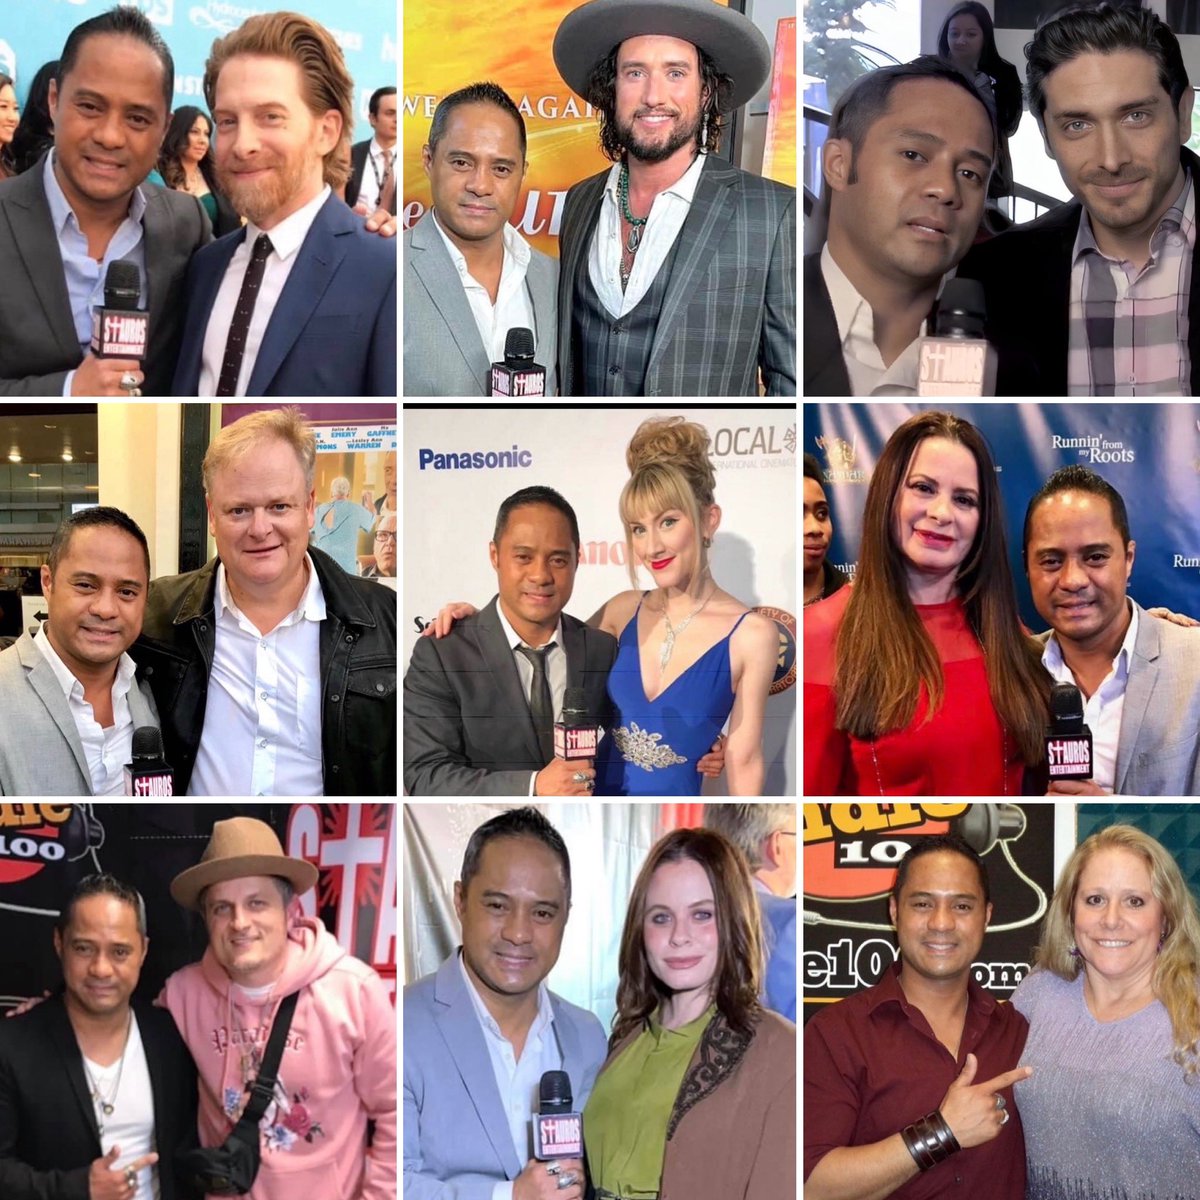 Wanted2Play #CatchUp & Give a #BigBirthday ShoutOut2 Several #AwesomeSweet Interviewed Guests, & Talents!  Happy Birthday &/Or Belated Bday2; @SethGreen, @Actor_Tyler_G, @joshkeaton, @LarryClarke_, @TaraAzarian, #GabrielleEvans, #DJDallas, @AugieDuke, & @RealMoKelly!  #AdoreUAll!